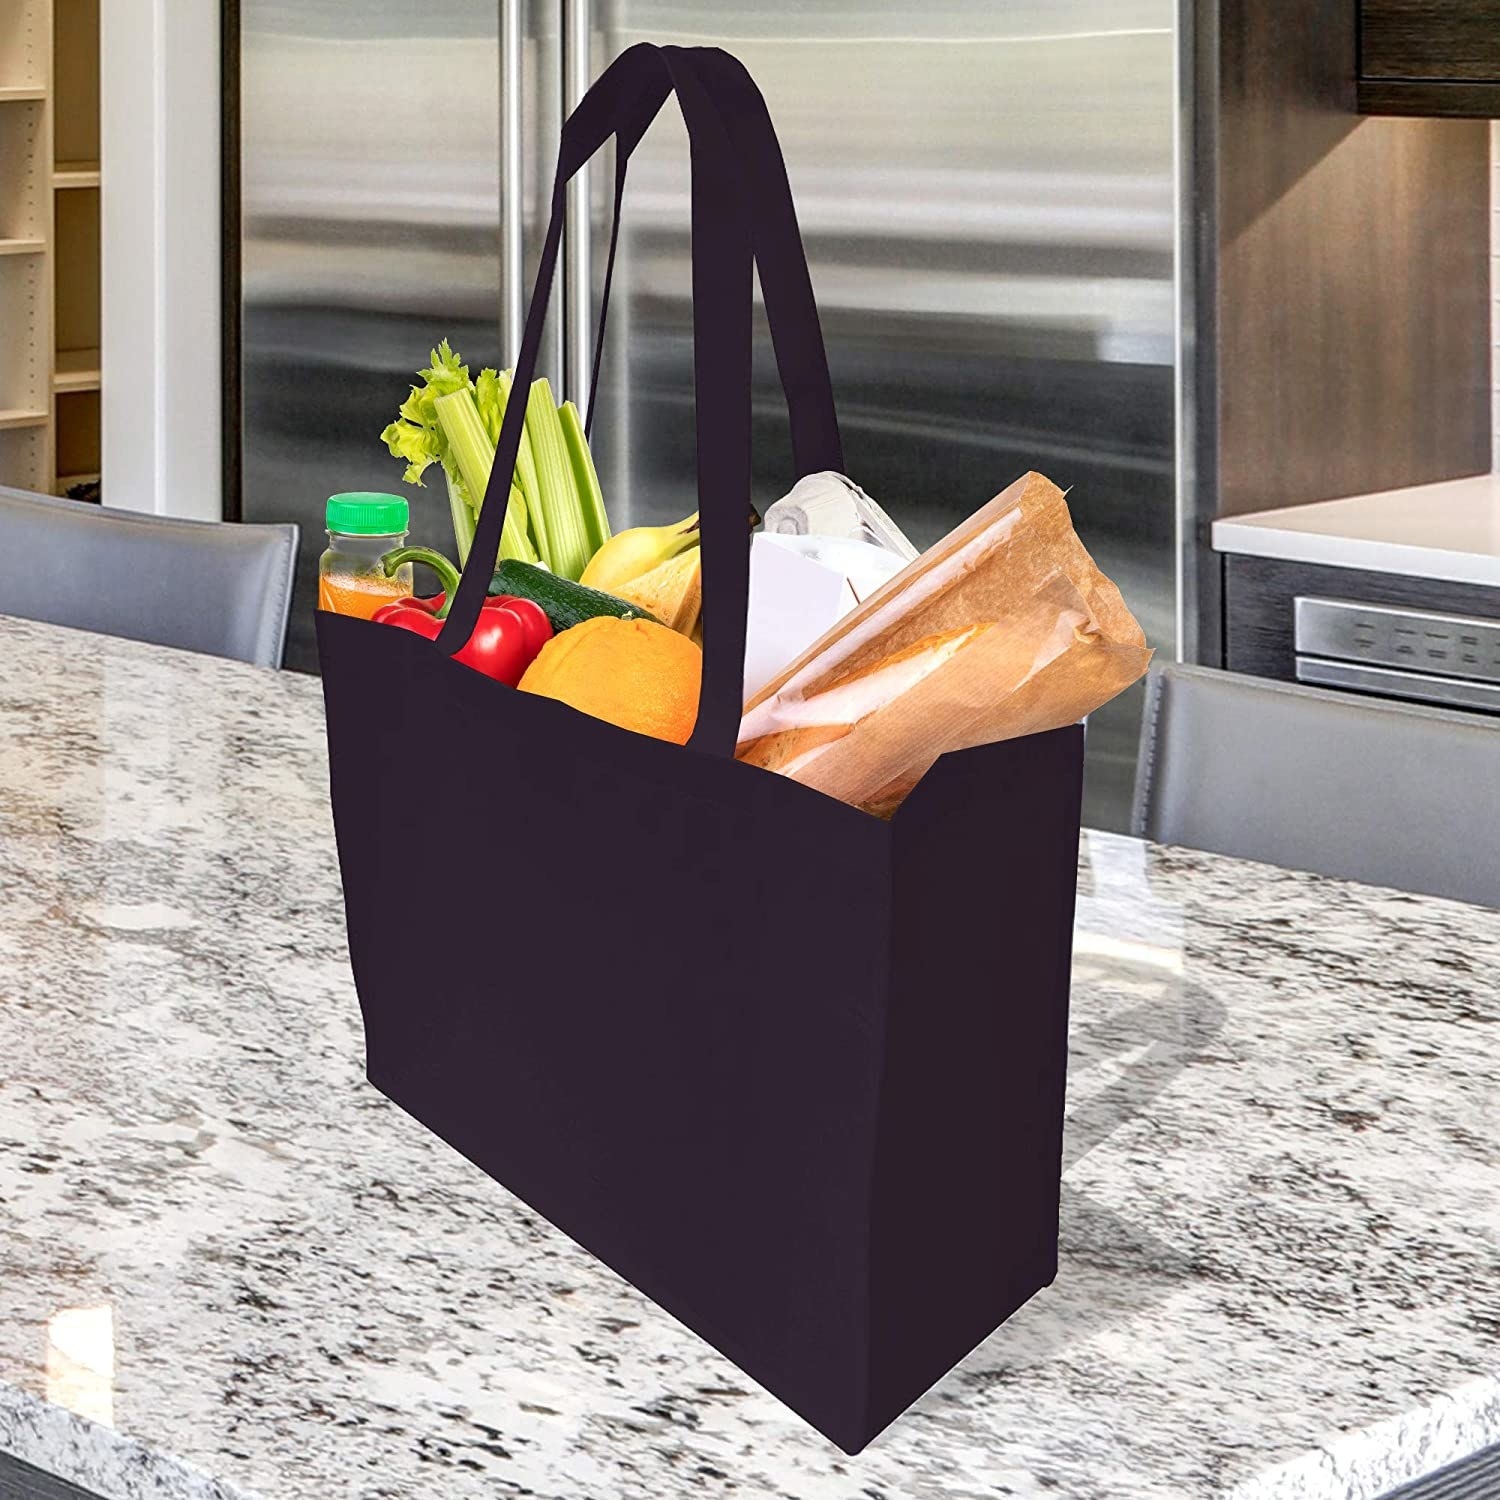 a grocery bag on a kitchen counter filled with food